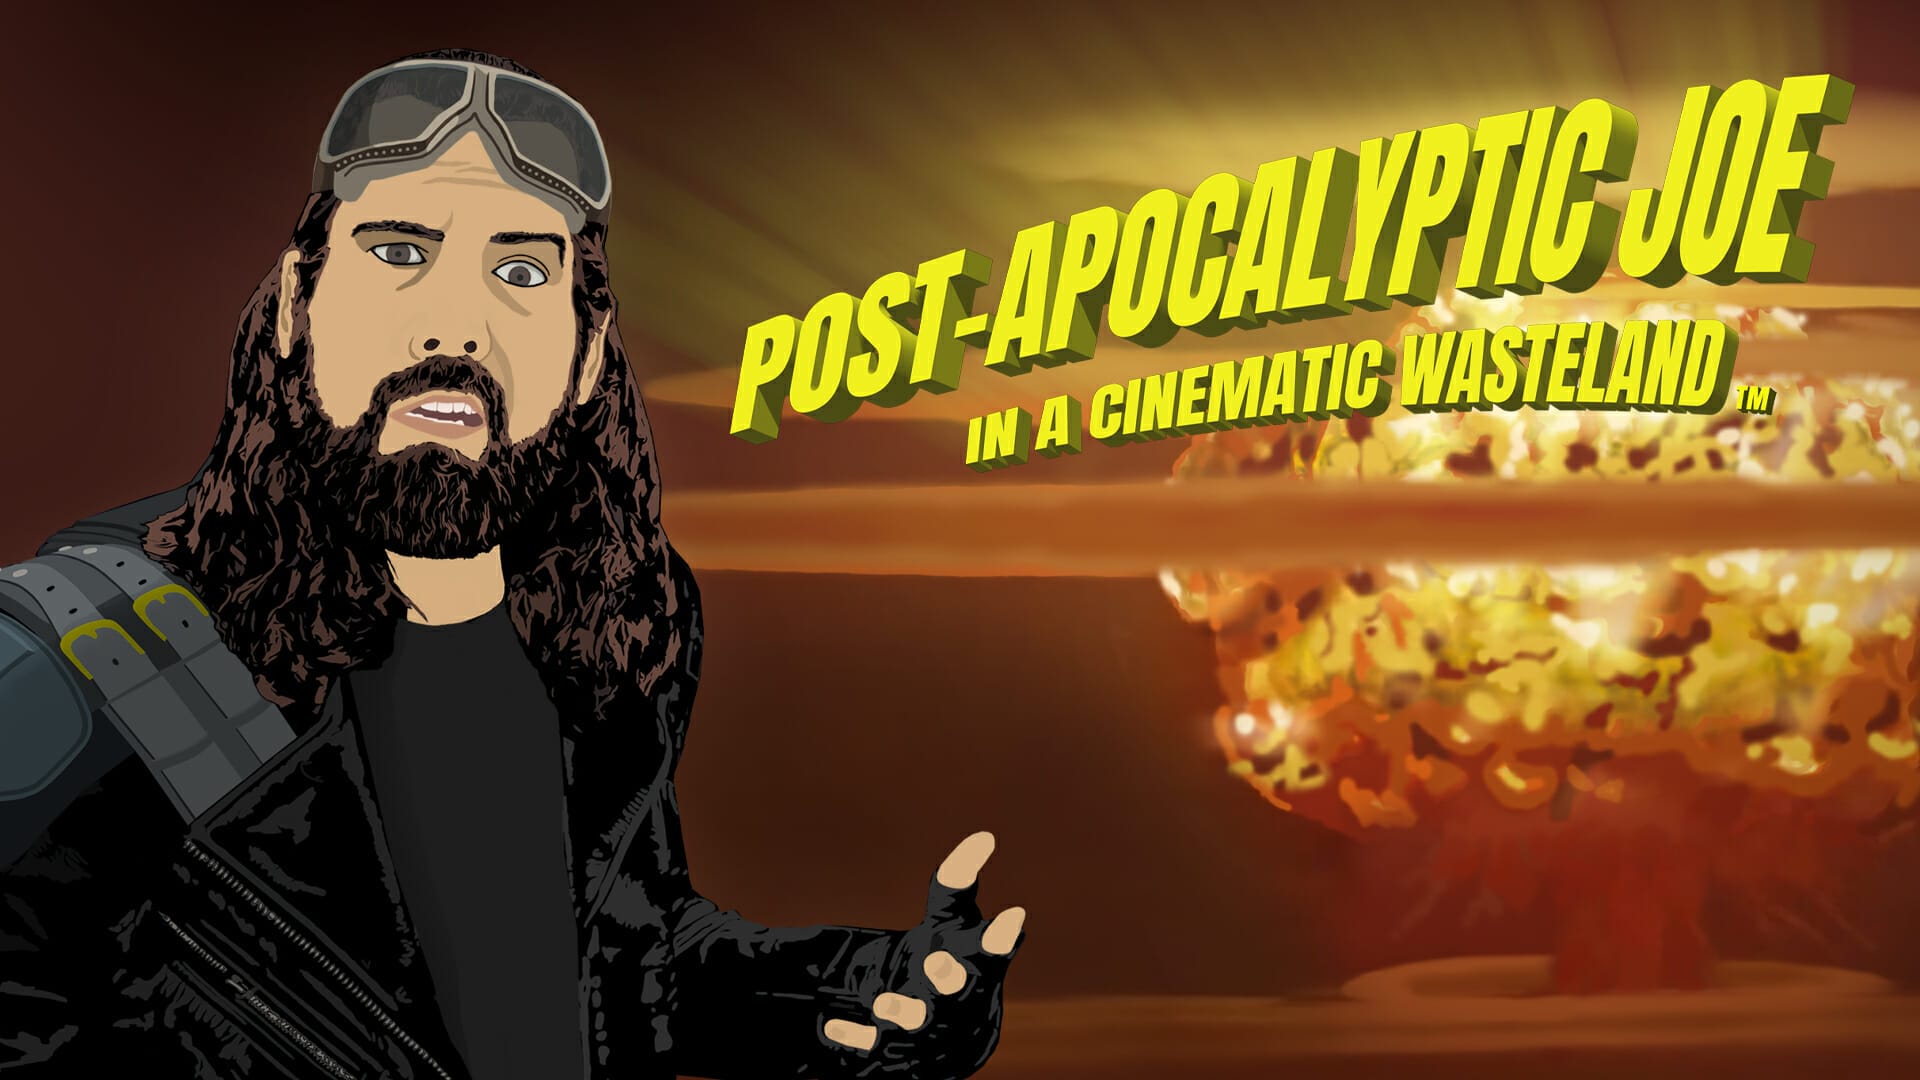 Man dressed in post-apocalyptic clothing with an atomic explosion in the background. Text: Post-Apocalyptic Joe in a Cinematic Wasteland.